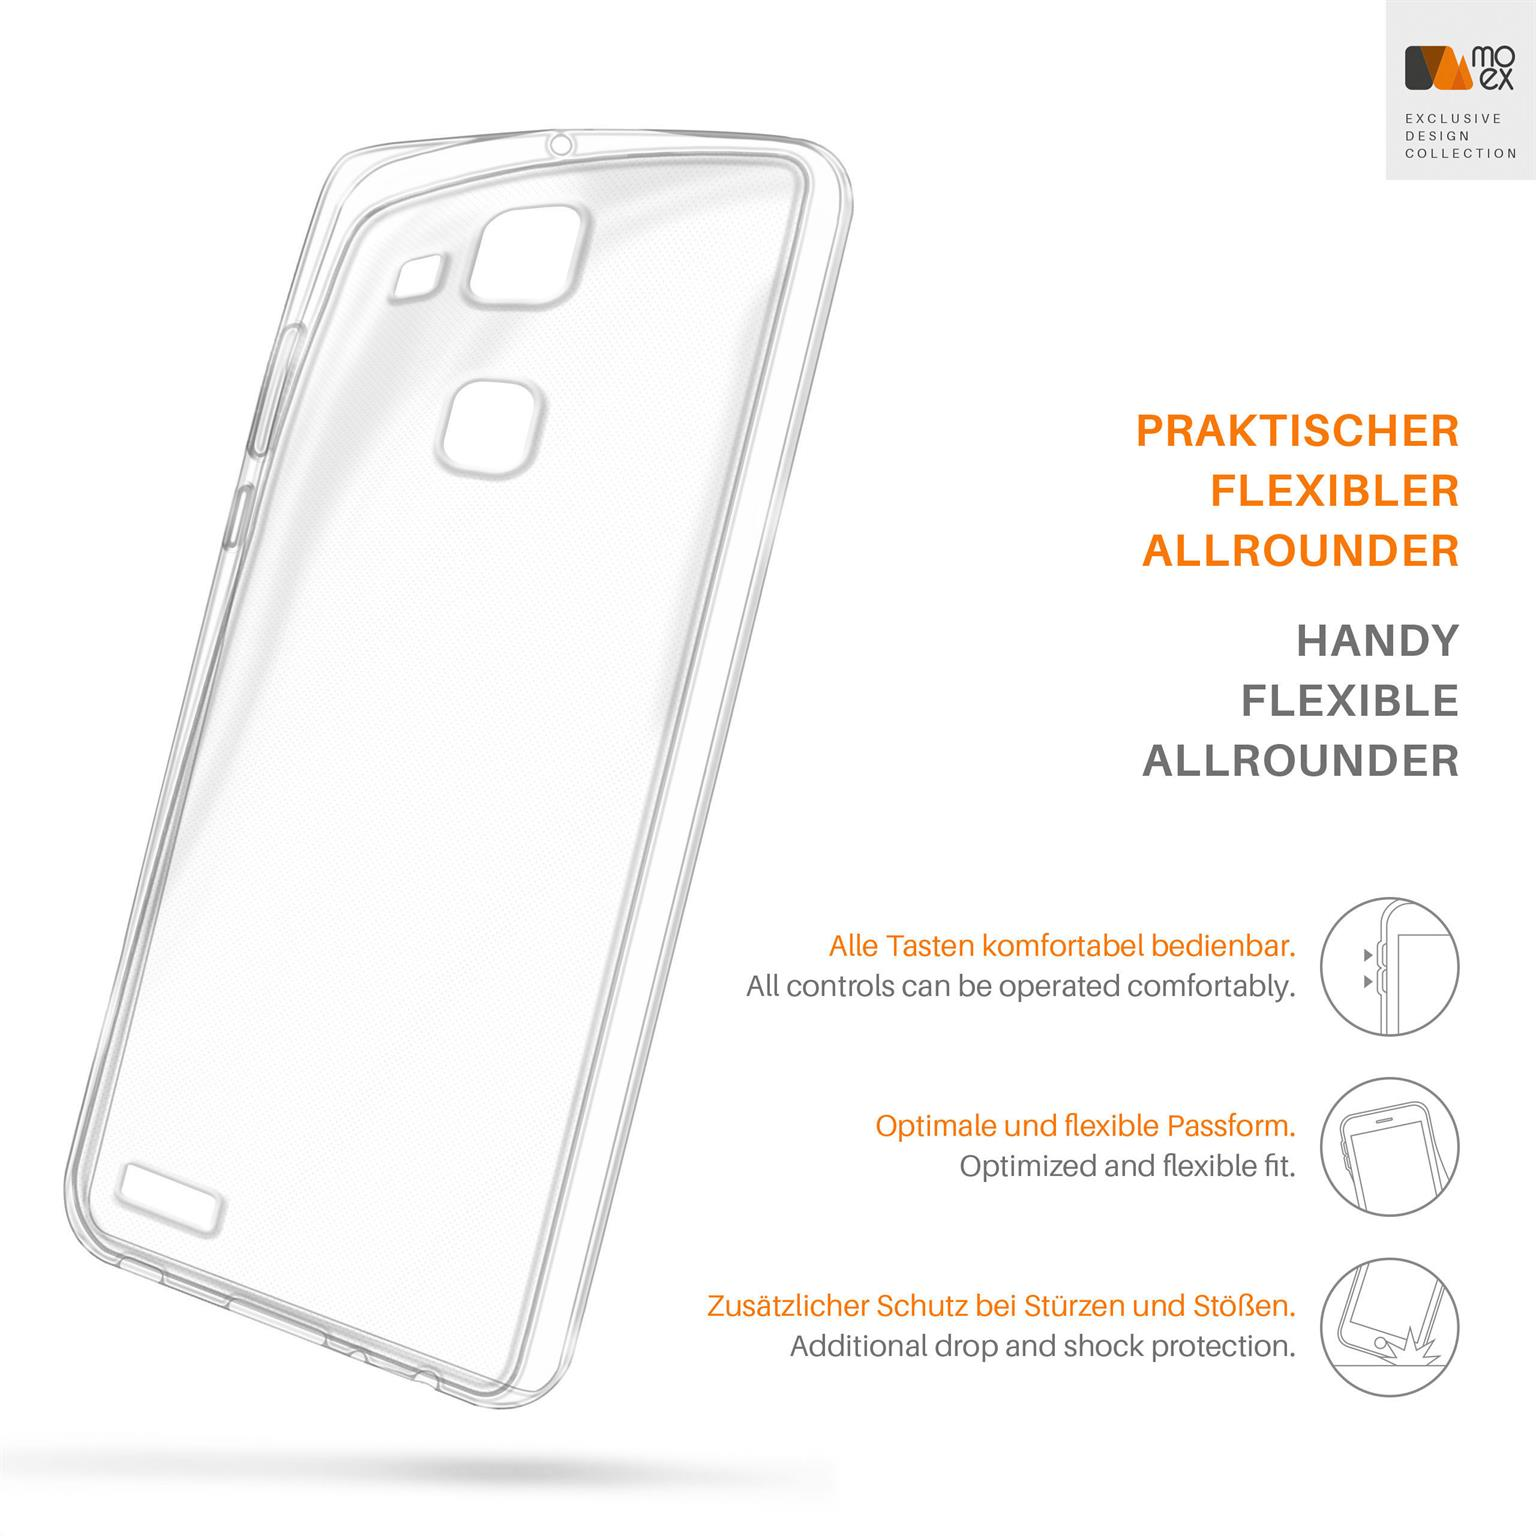 Backcover, MOEX Ascend Case, 7, Huawei, Crystal-Clear Mate Aero